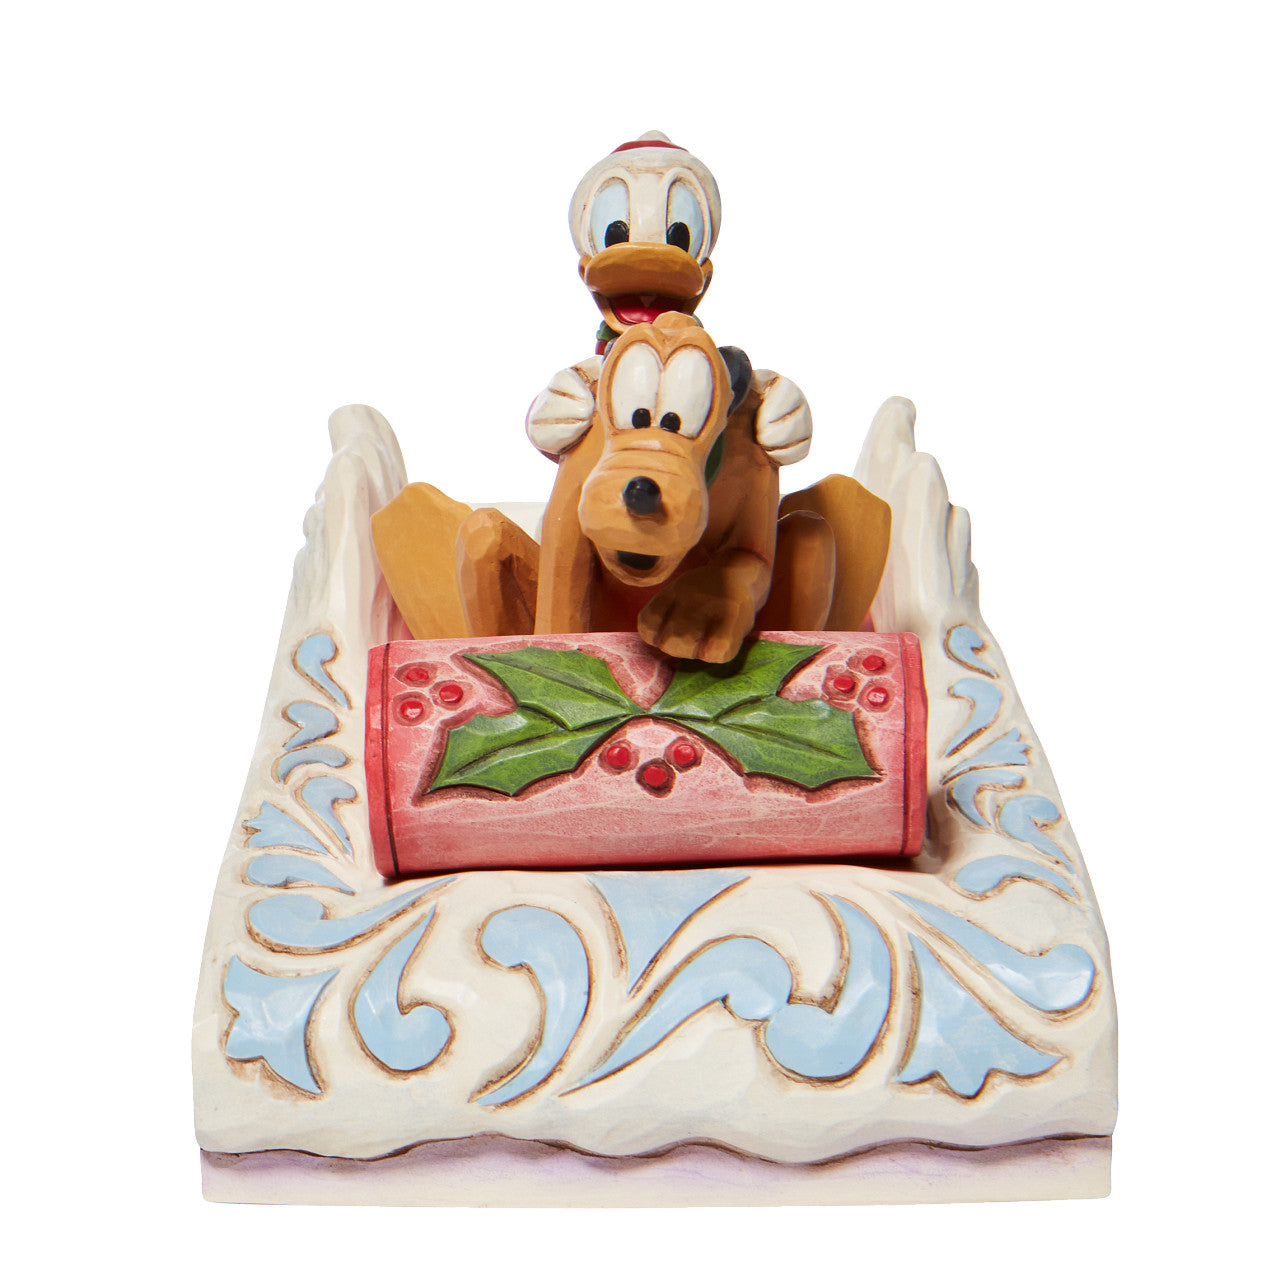 A Friendly Race - Donald and Pluto Sledding